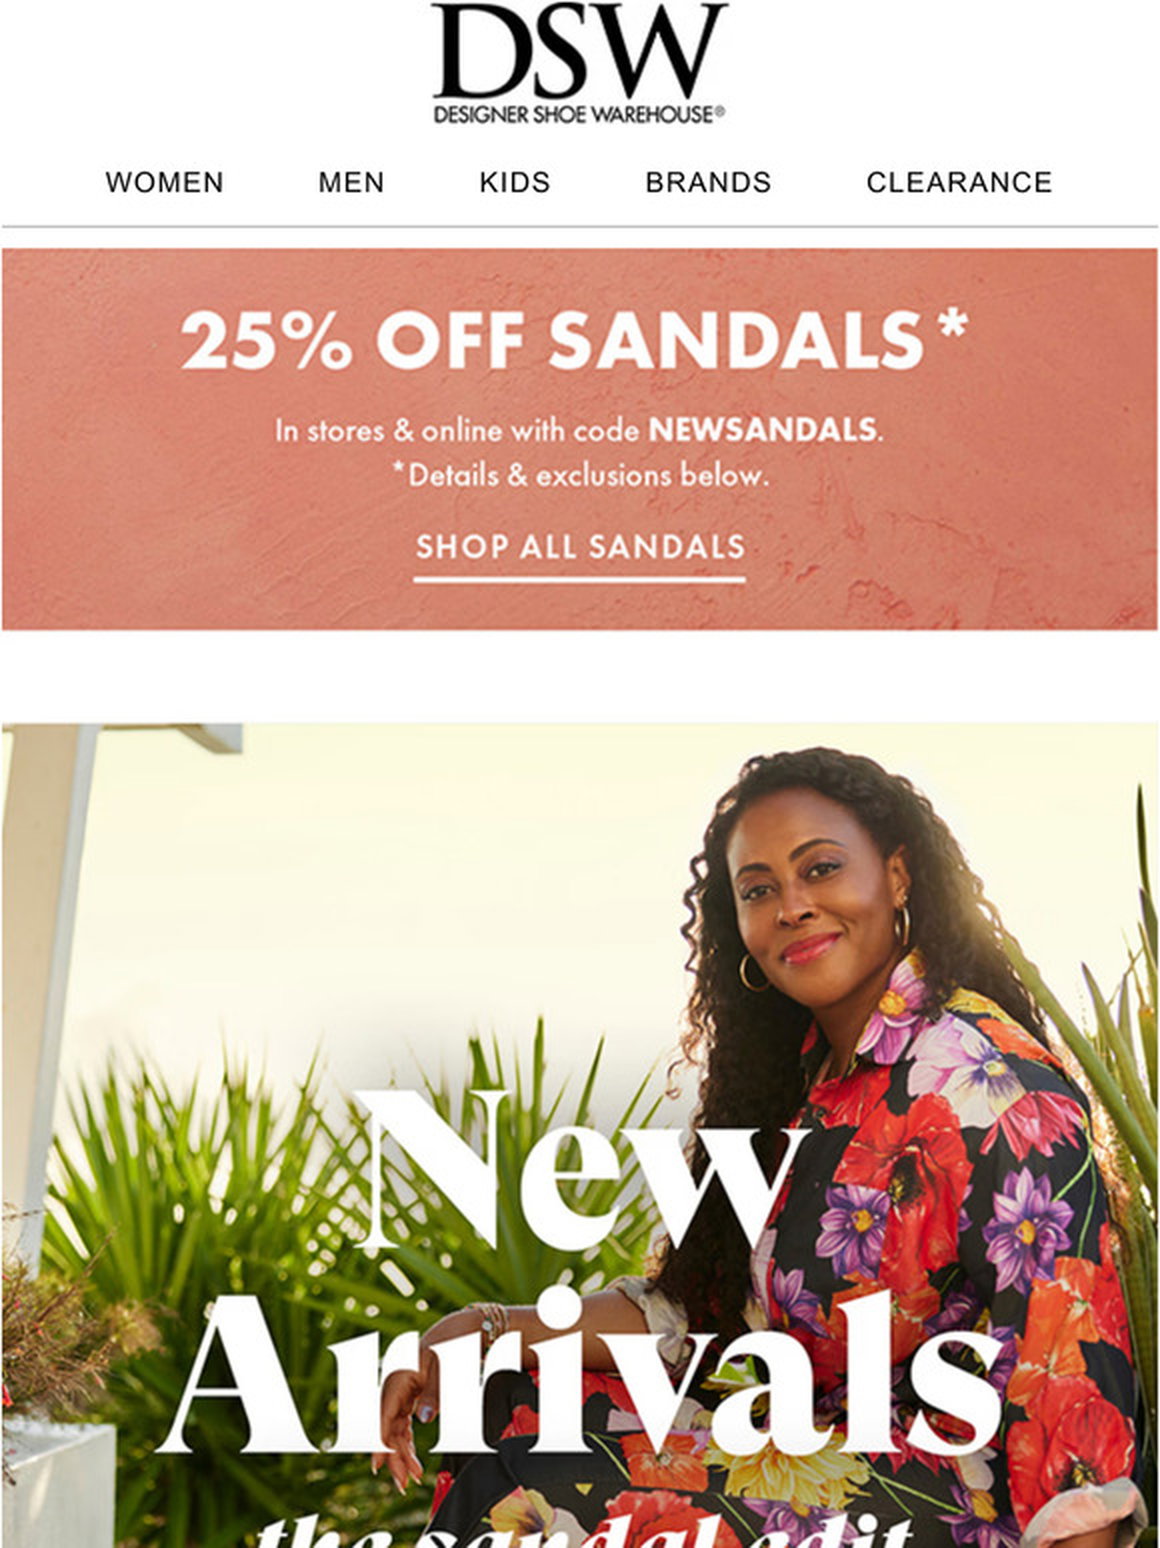 DSW: New sandals are here 🏖️ | Milled